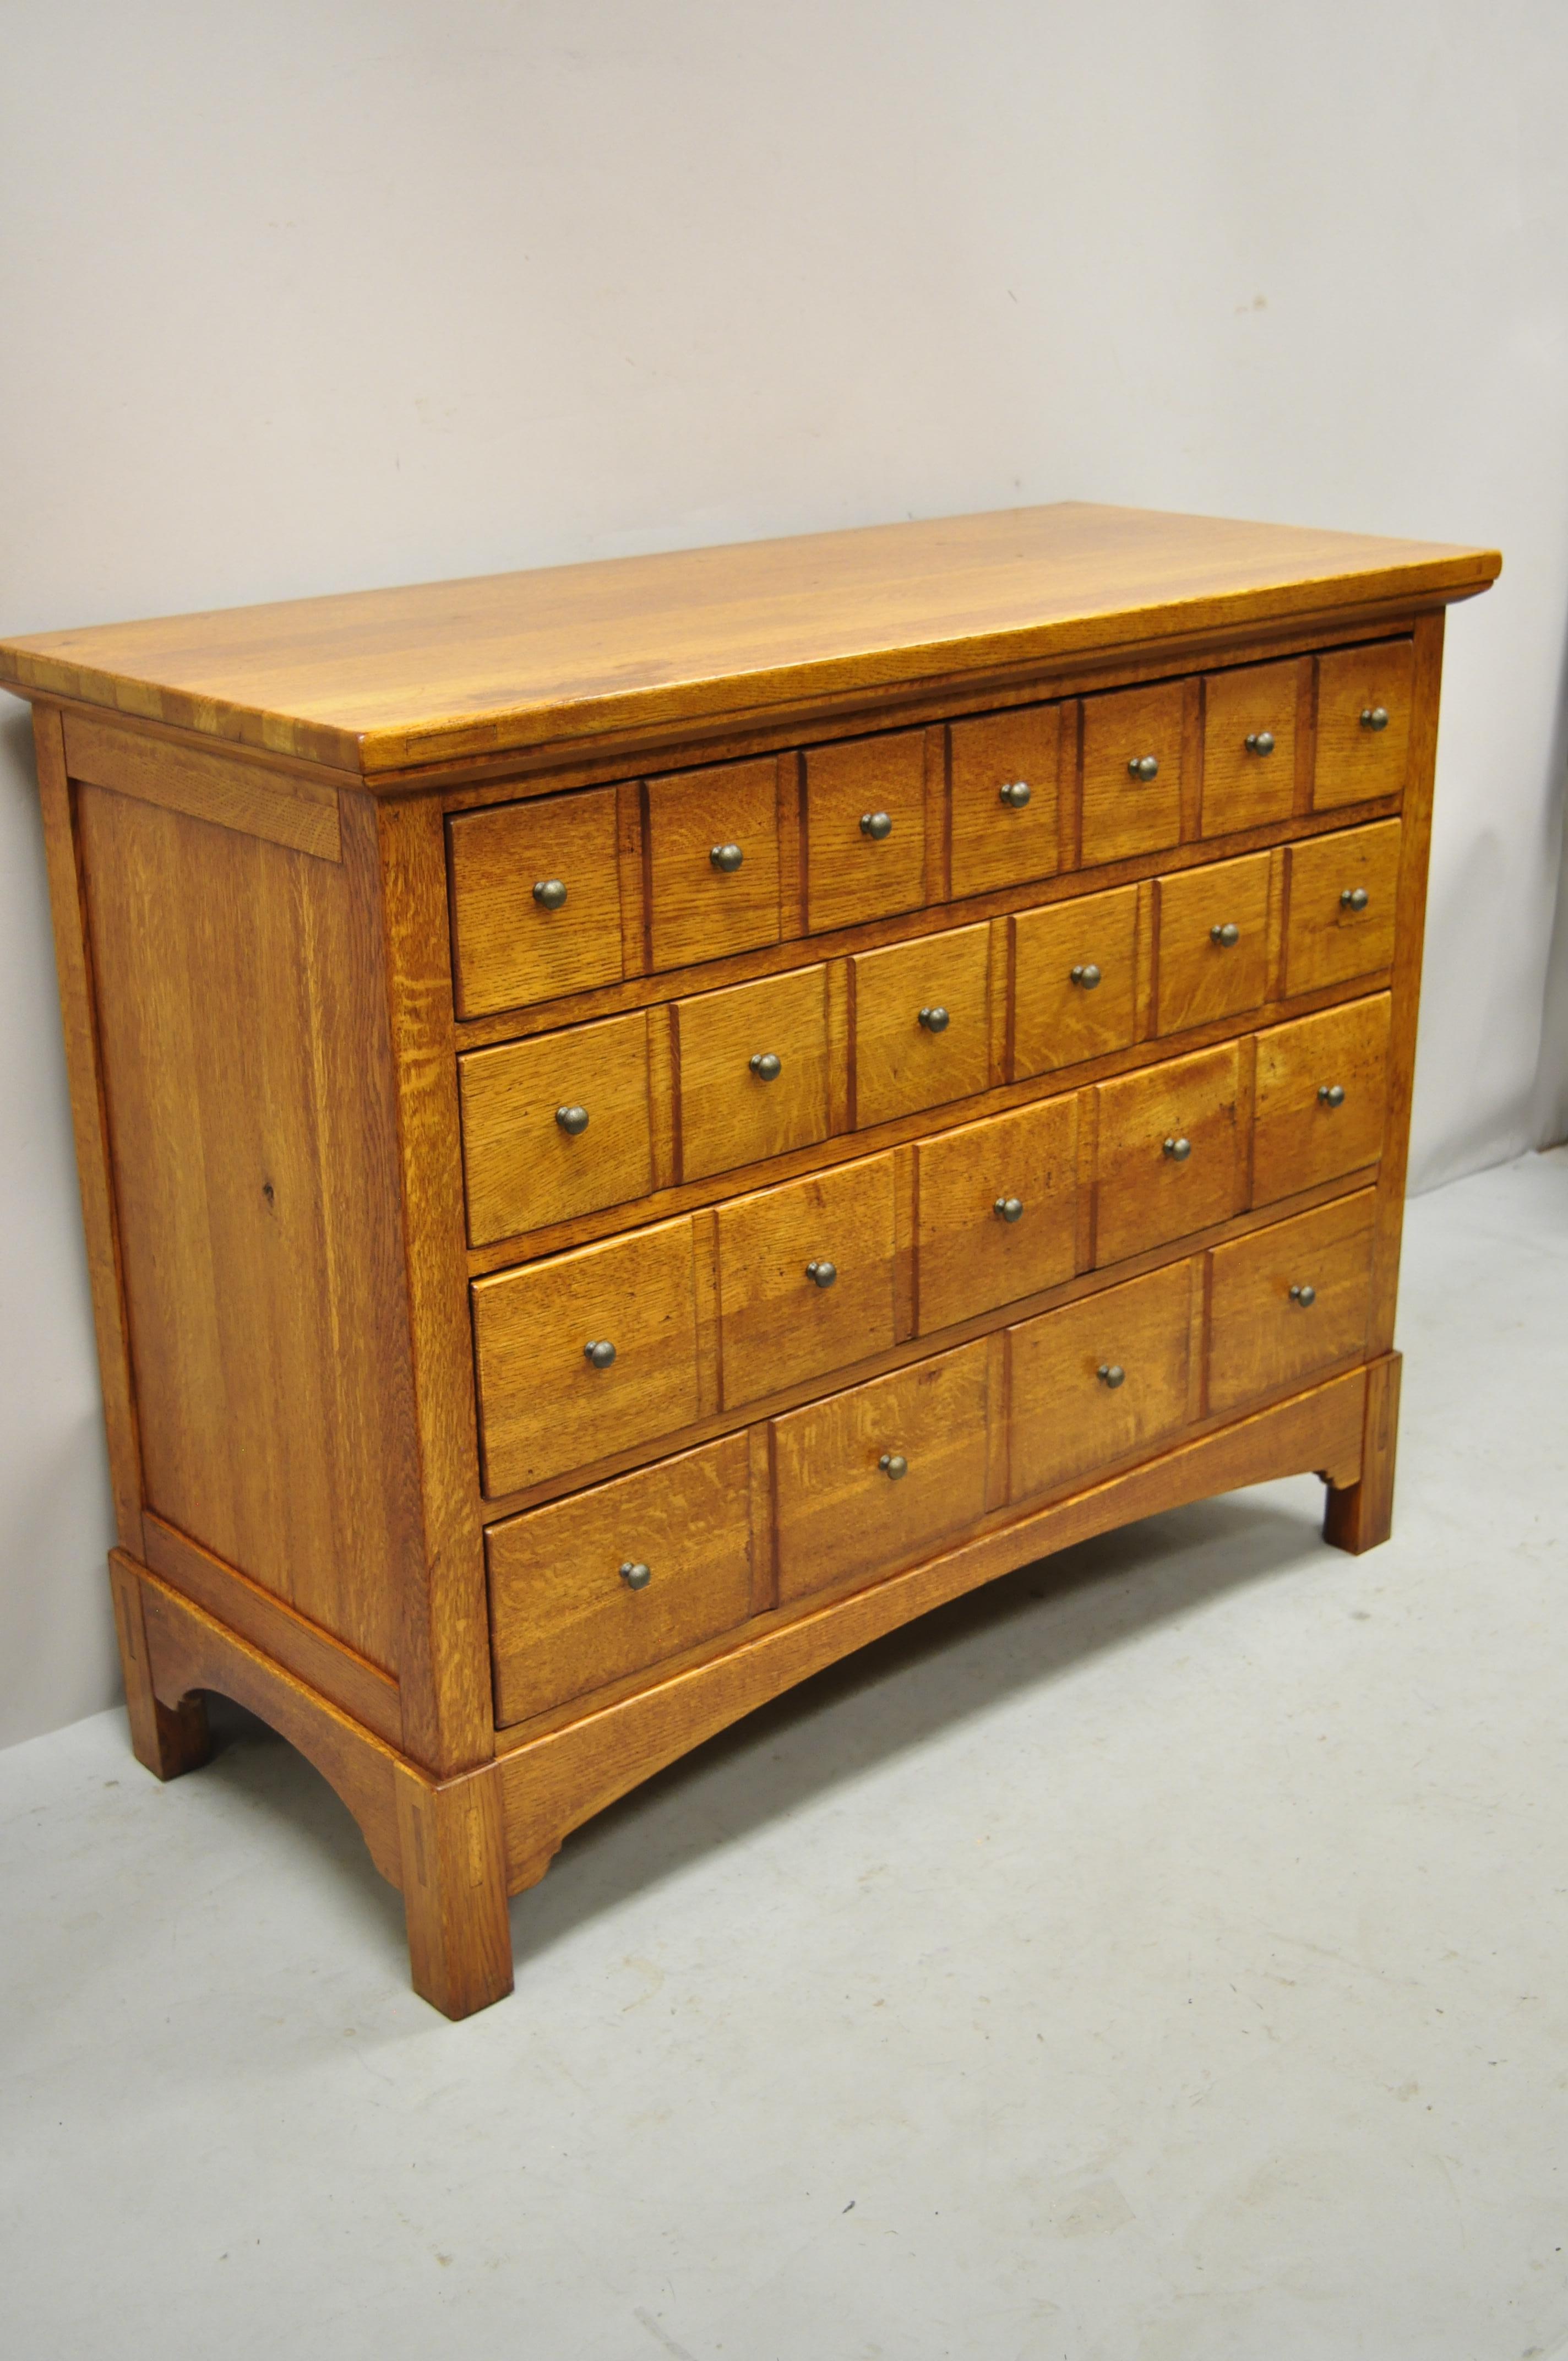 Lexington Furniture Bob Timberlake Arts and Crafts Collection oak wood single dresser. Item features solid wood construction, beautiful wood grain, original labels, 4 dovetailed drawers, very nice vintage item, quality American craftsmanship, great